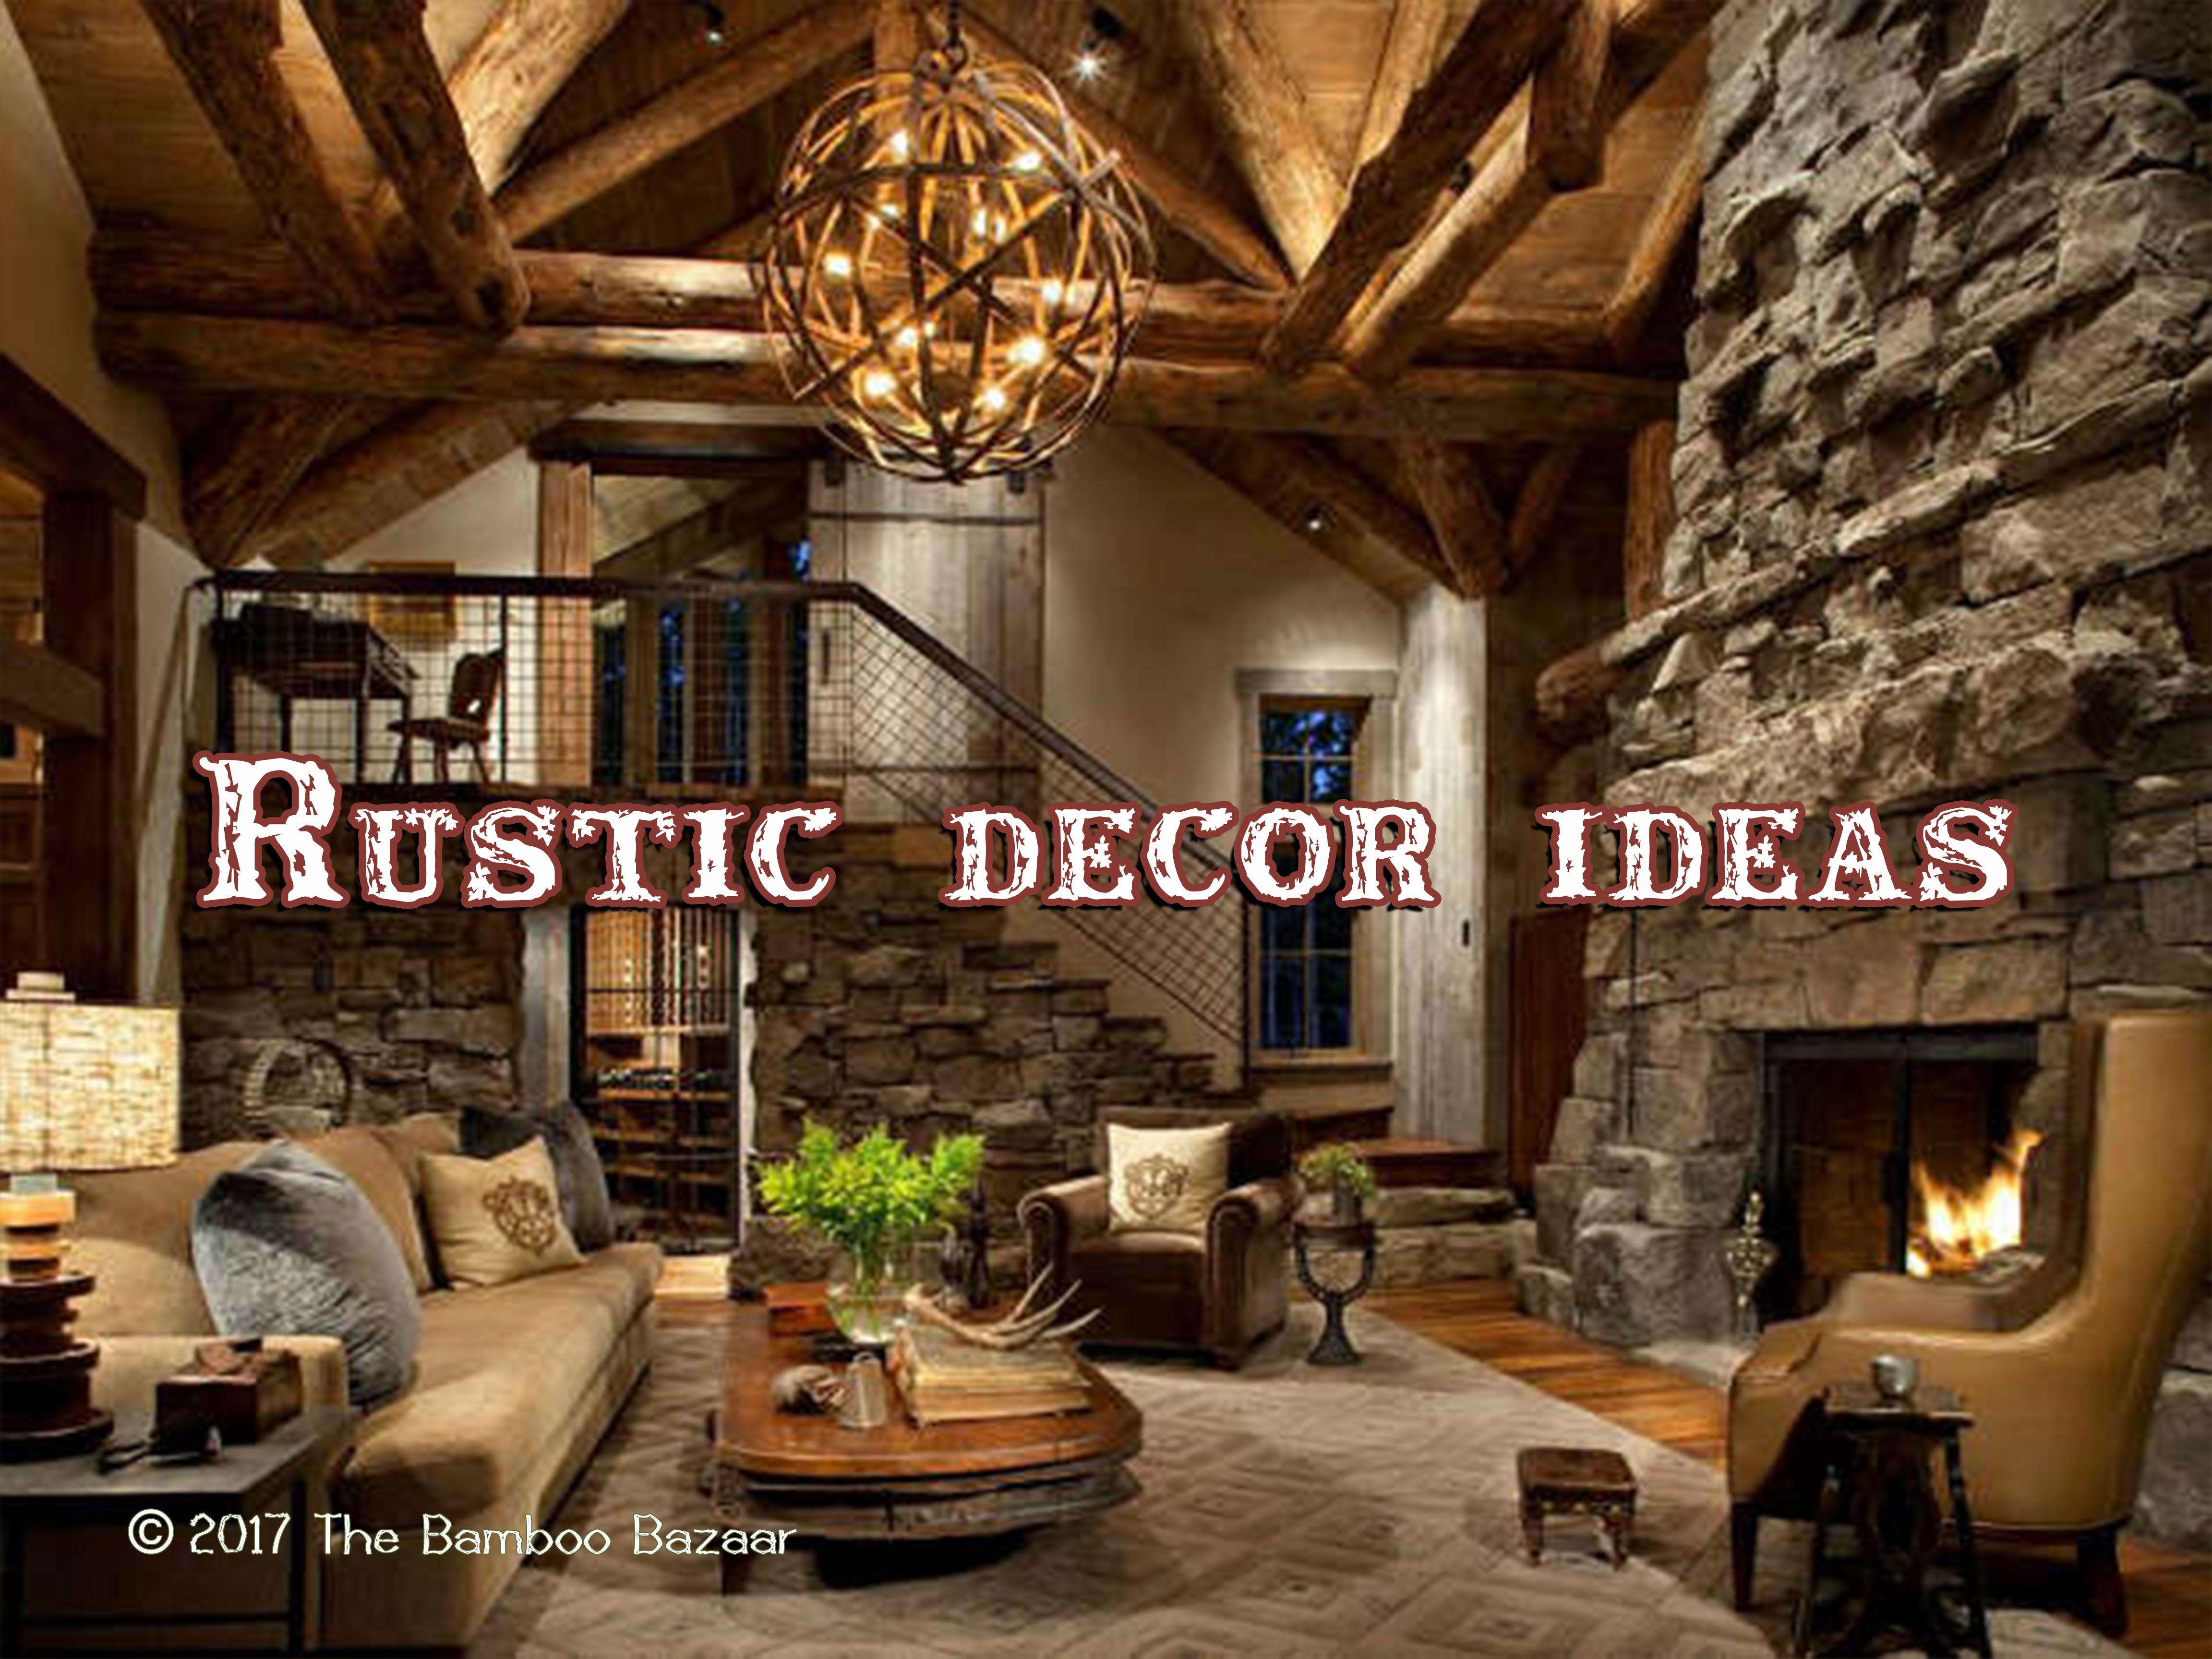 Rustic Décor Ideas, A Guide to Transform your Home